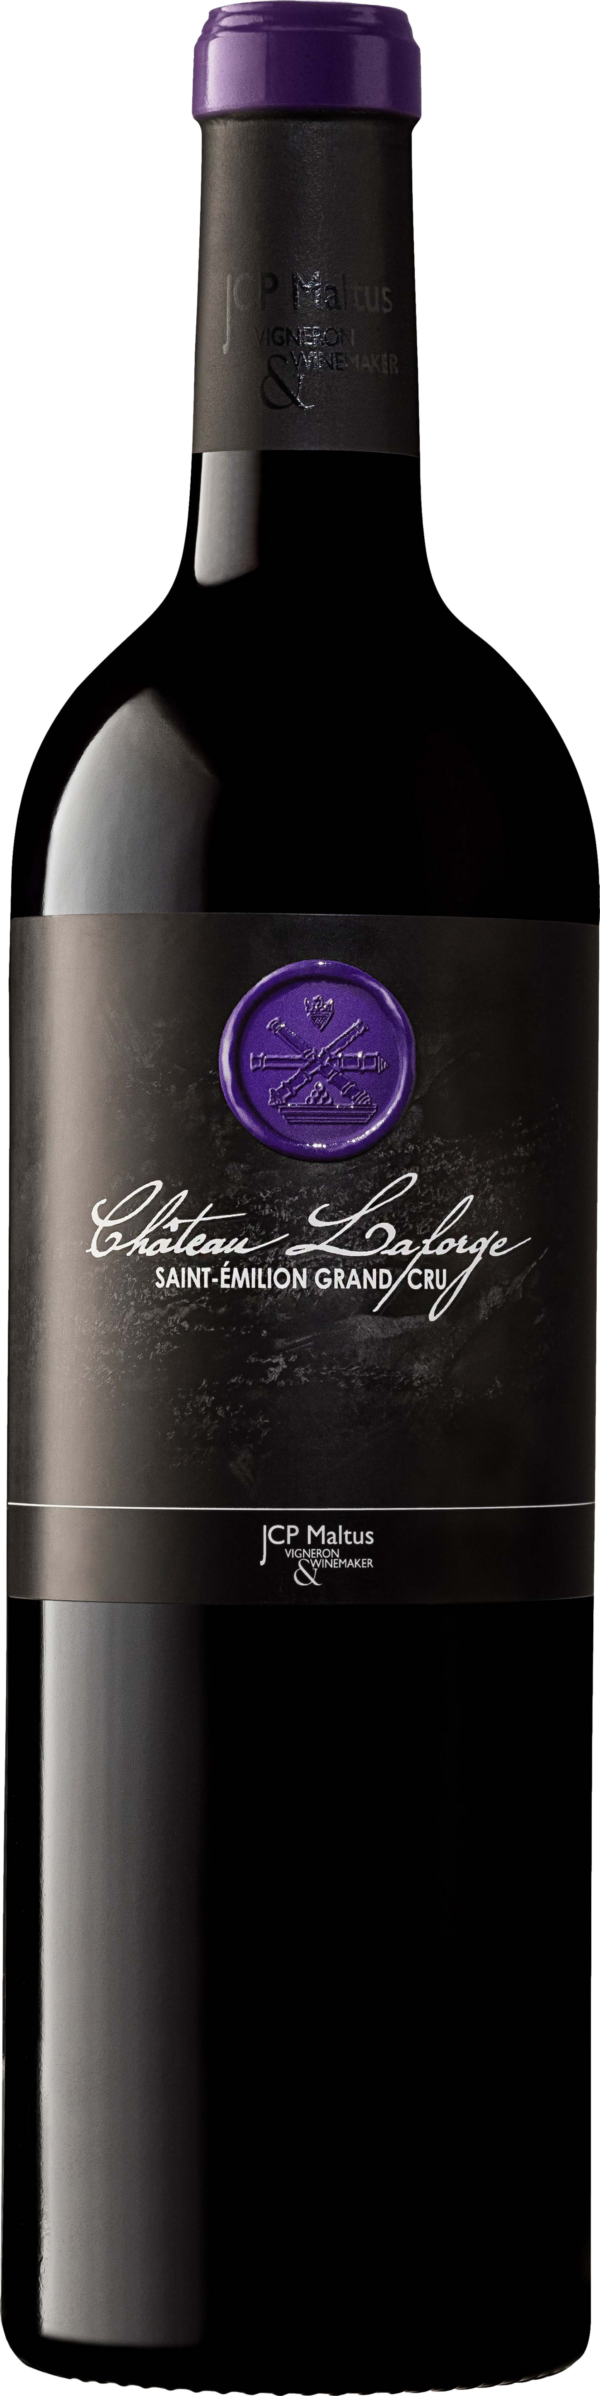 Product image of Chateau Laforge Saint Emilion Grand Cru 2020 from 8wines